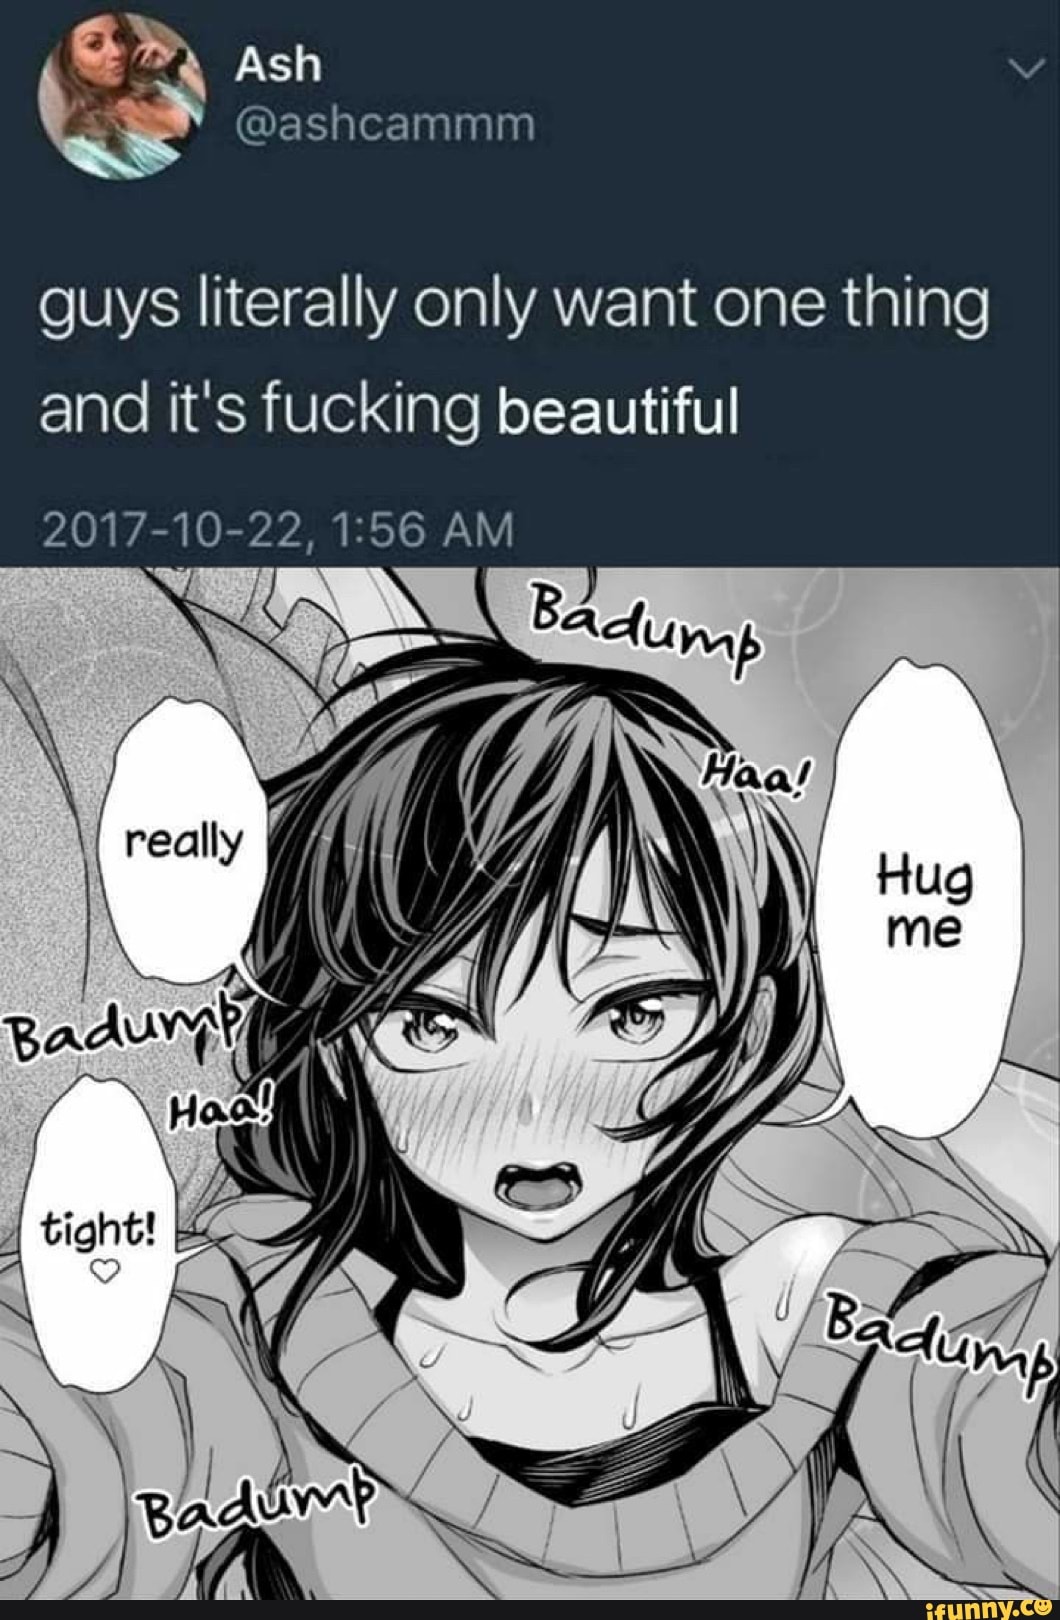 guys literally only want one thing